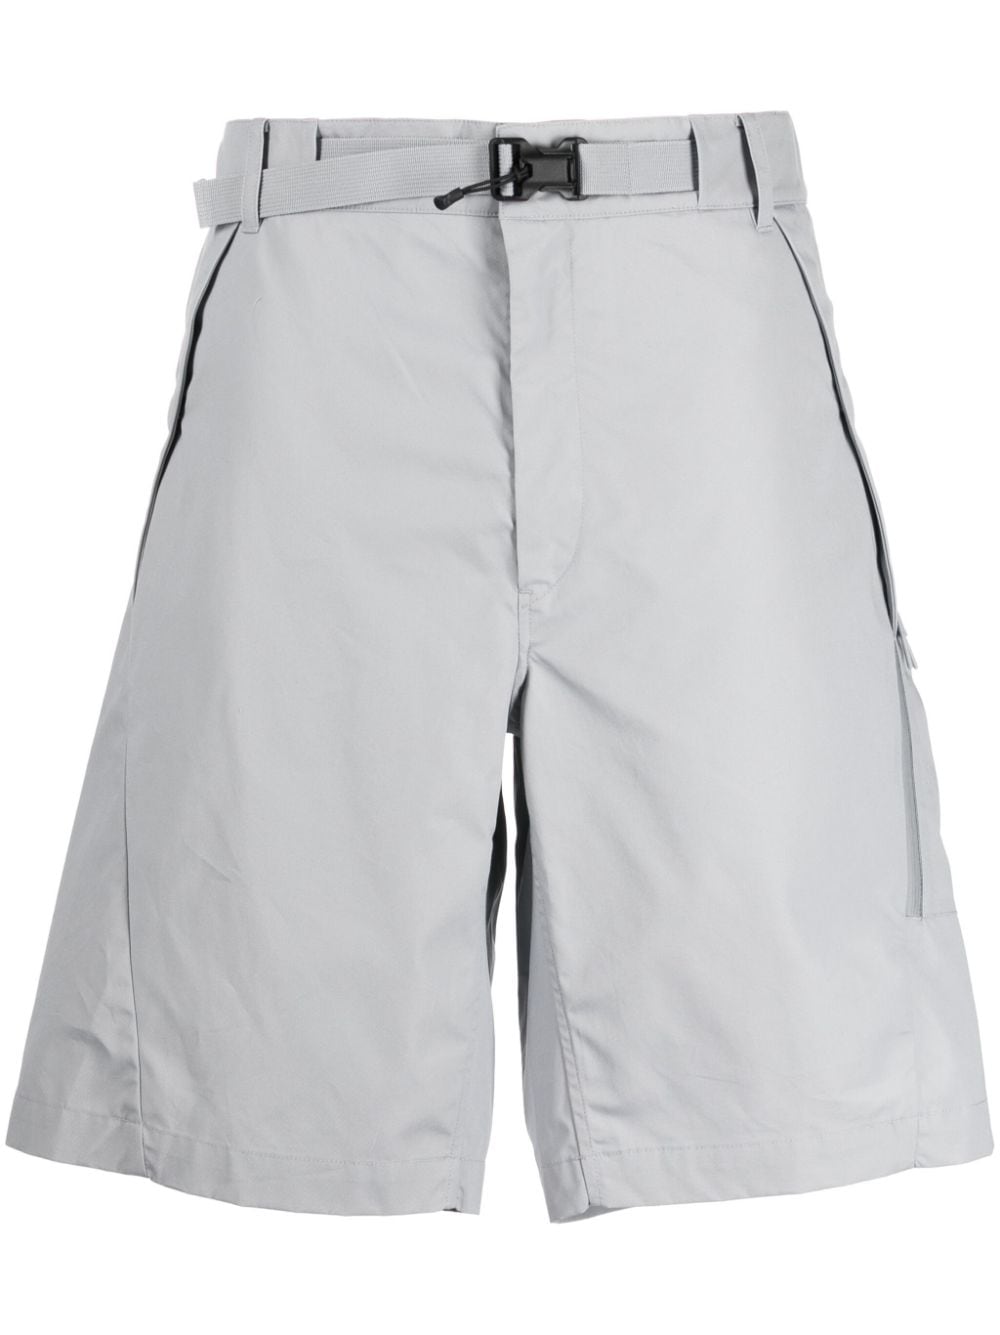 C.p. Company Metropolis Series Belted Cotton Shorts In Grey